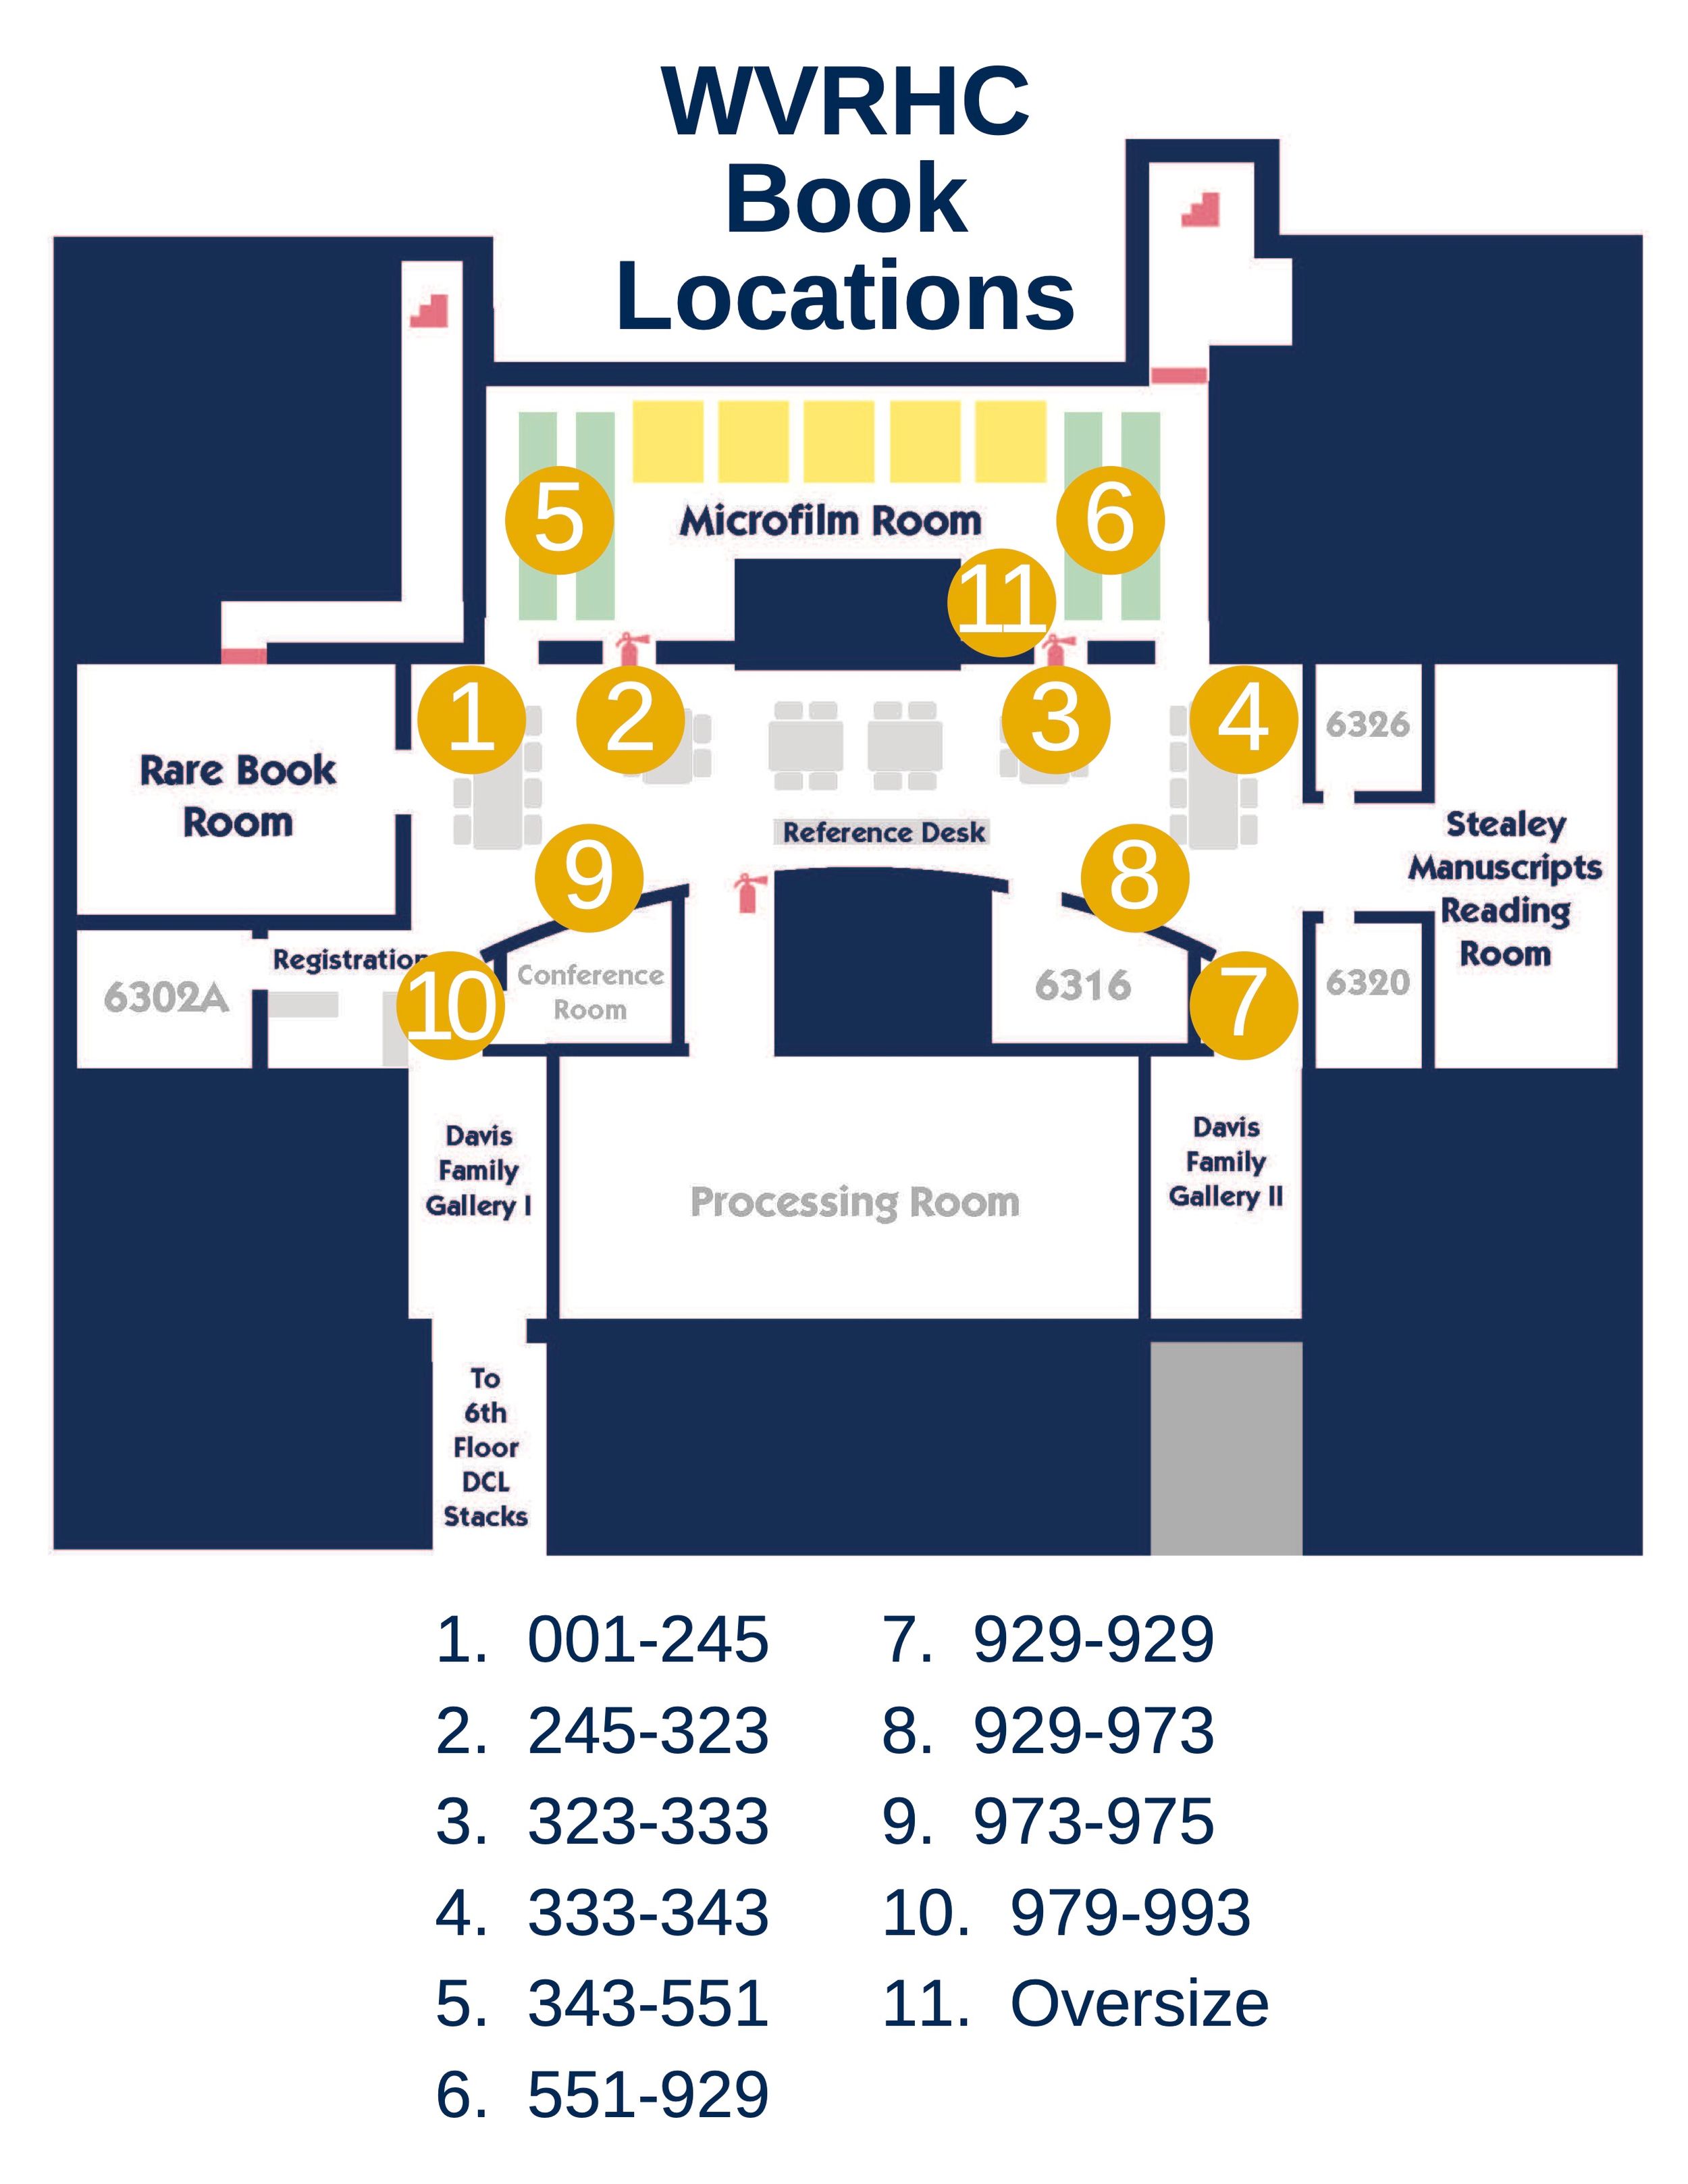 floorplan of the WVRHC with call numbers